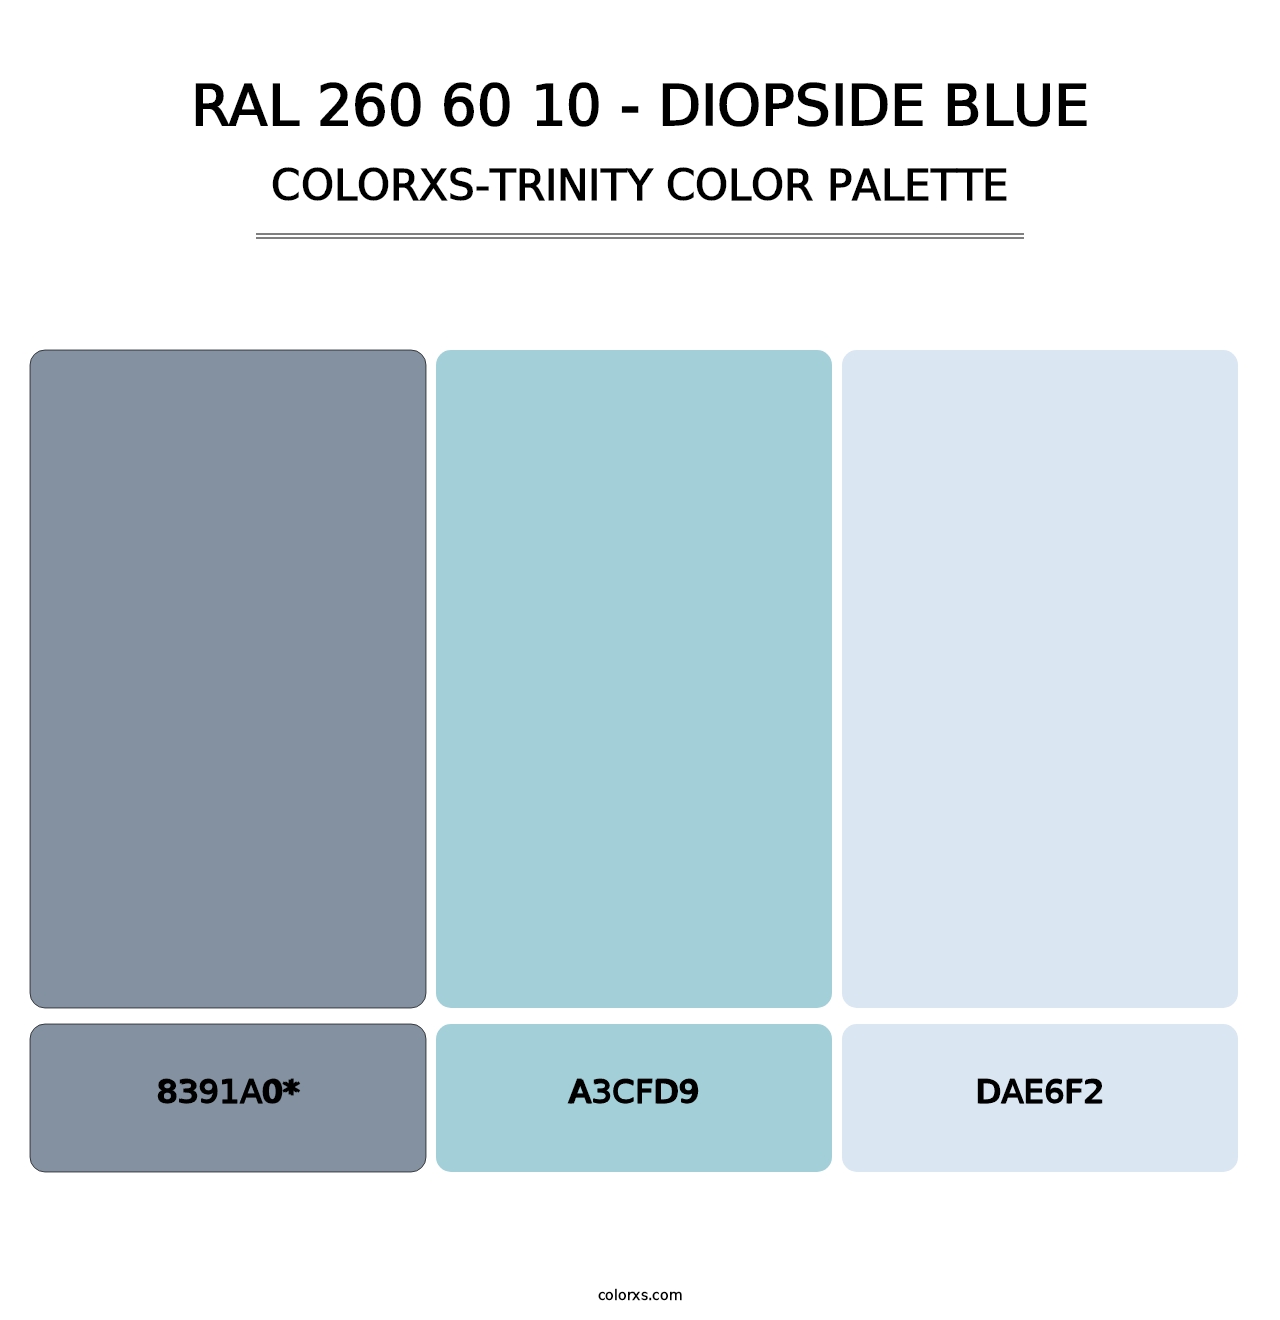 RAL 260 60 10 - Diopside Blue - Colorxs Trinity Palette